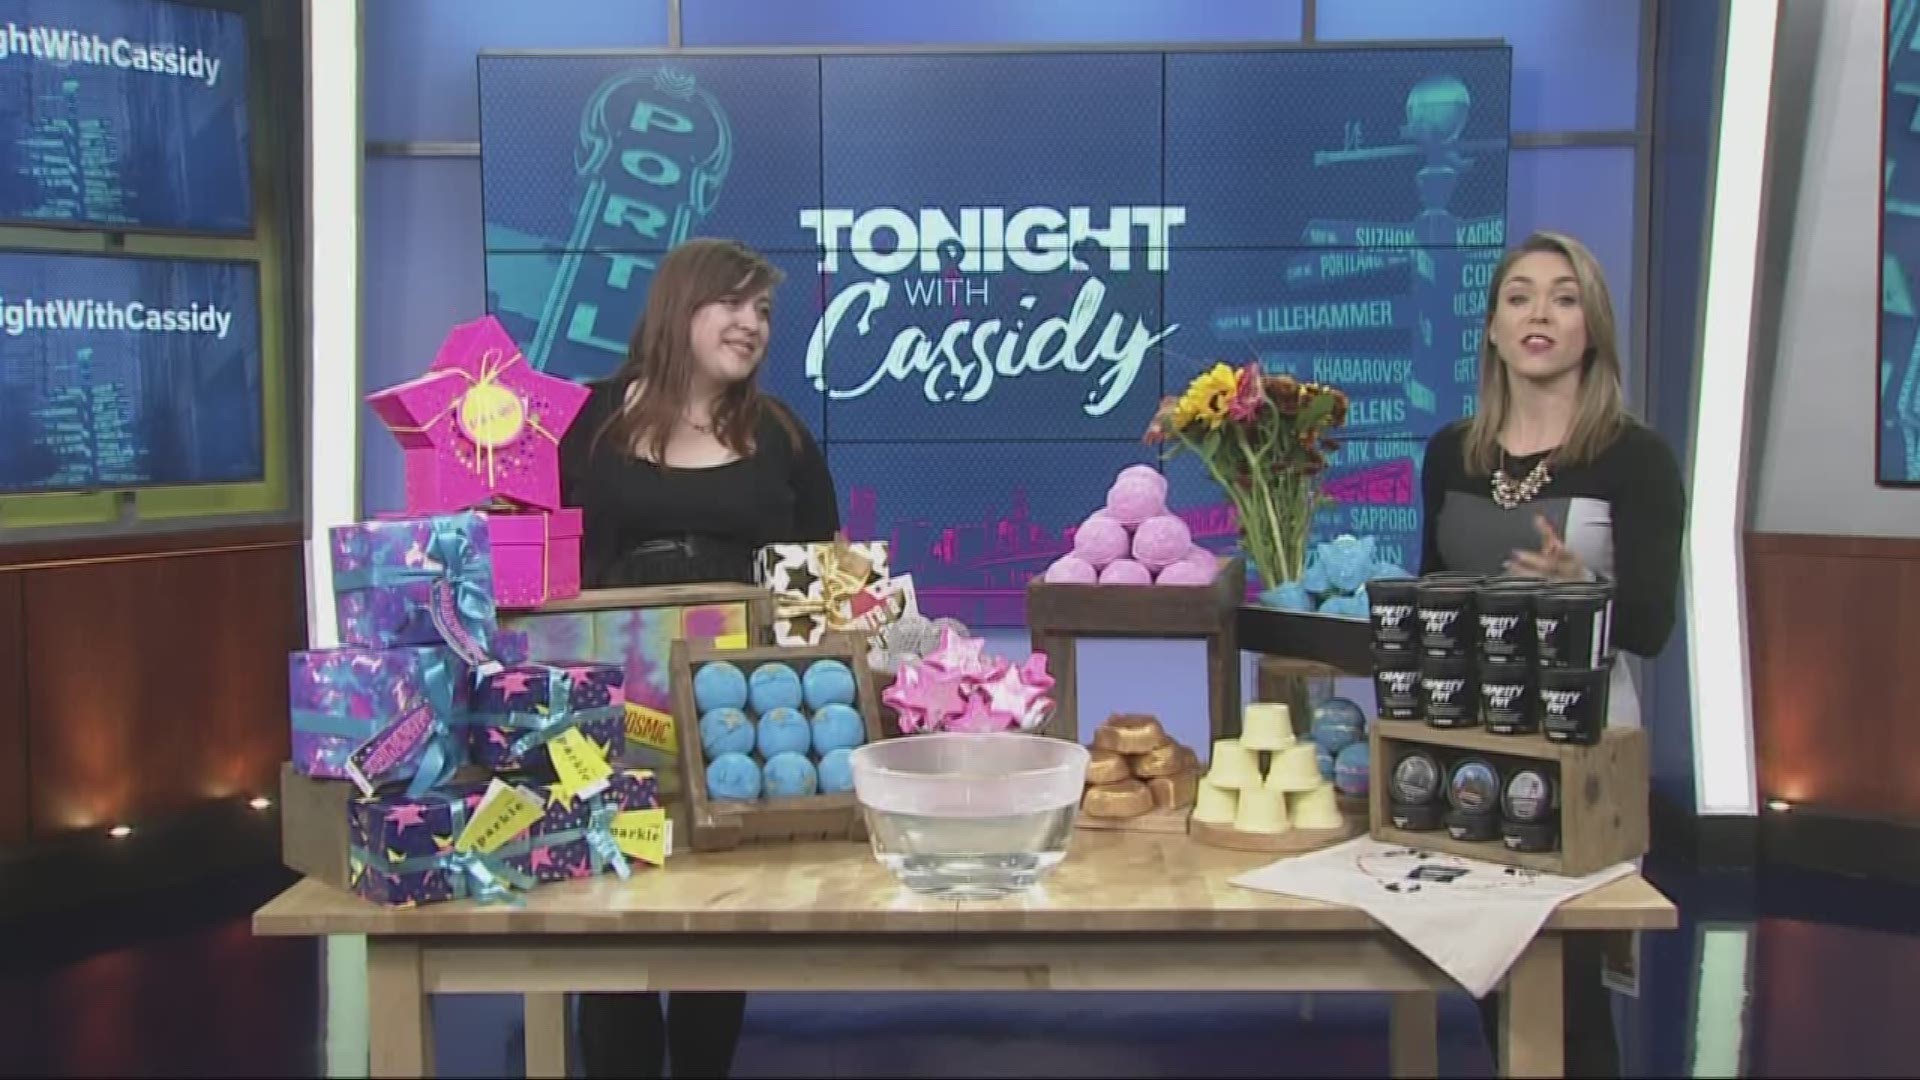 Lush is getting ready for Giving Tuesday on Nov. 27th.
lushusa.com
#TonightwithCassidy